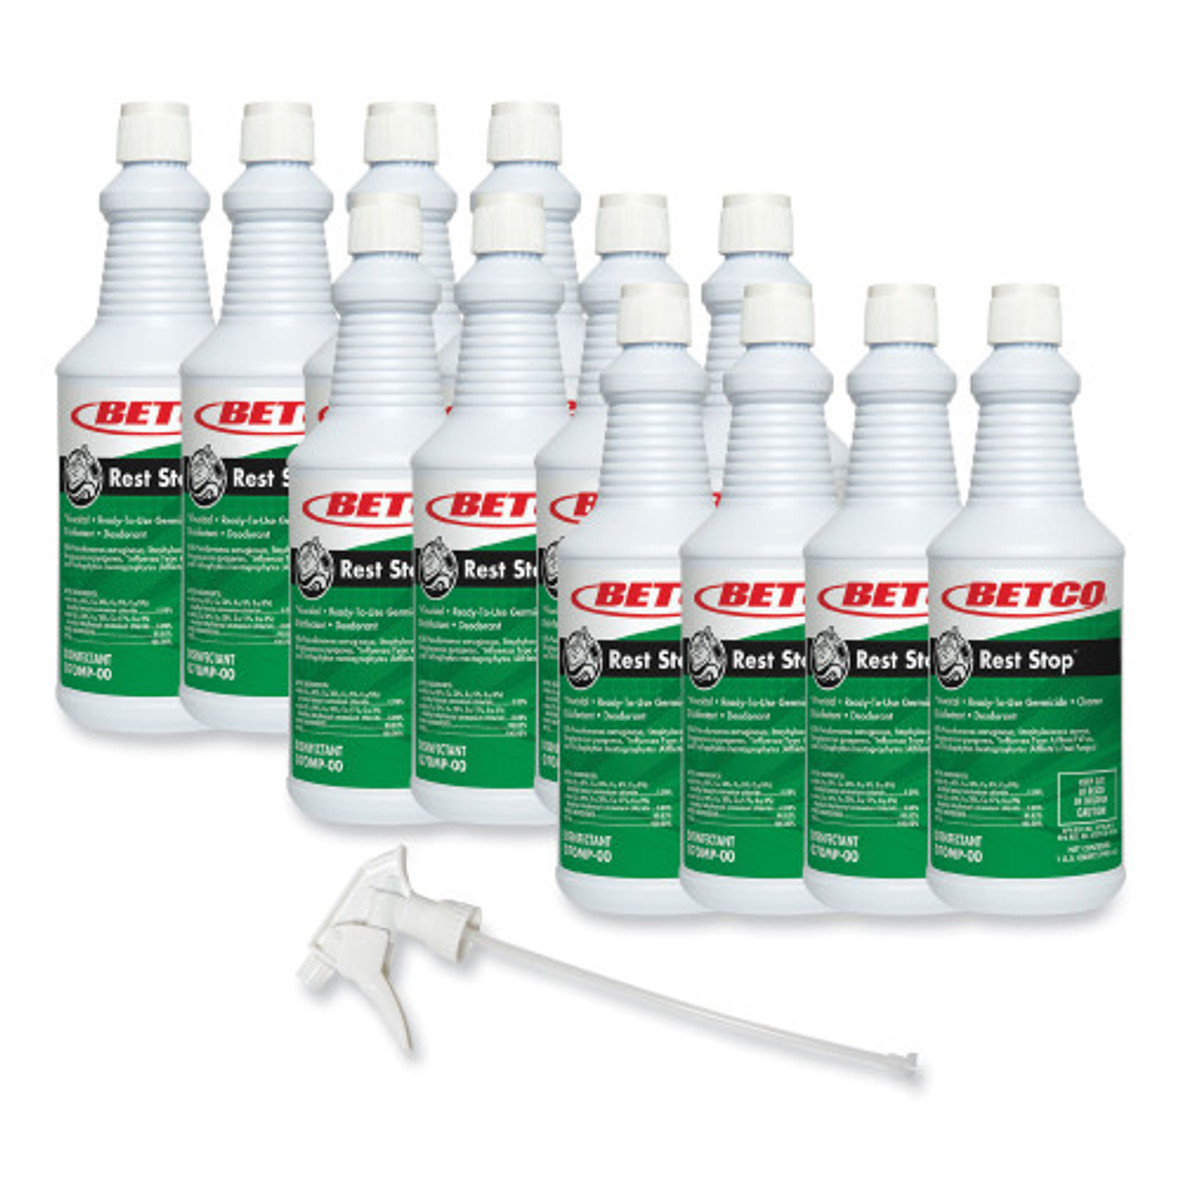 The Betco Rest Stop Ready-To-Use, Acid-Free Restroom Cleaner, 32 Oz, 12 Per Case